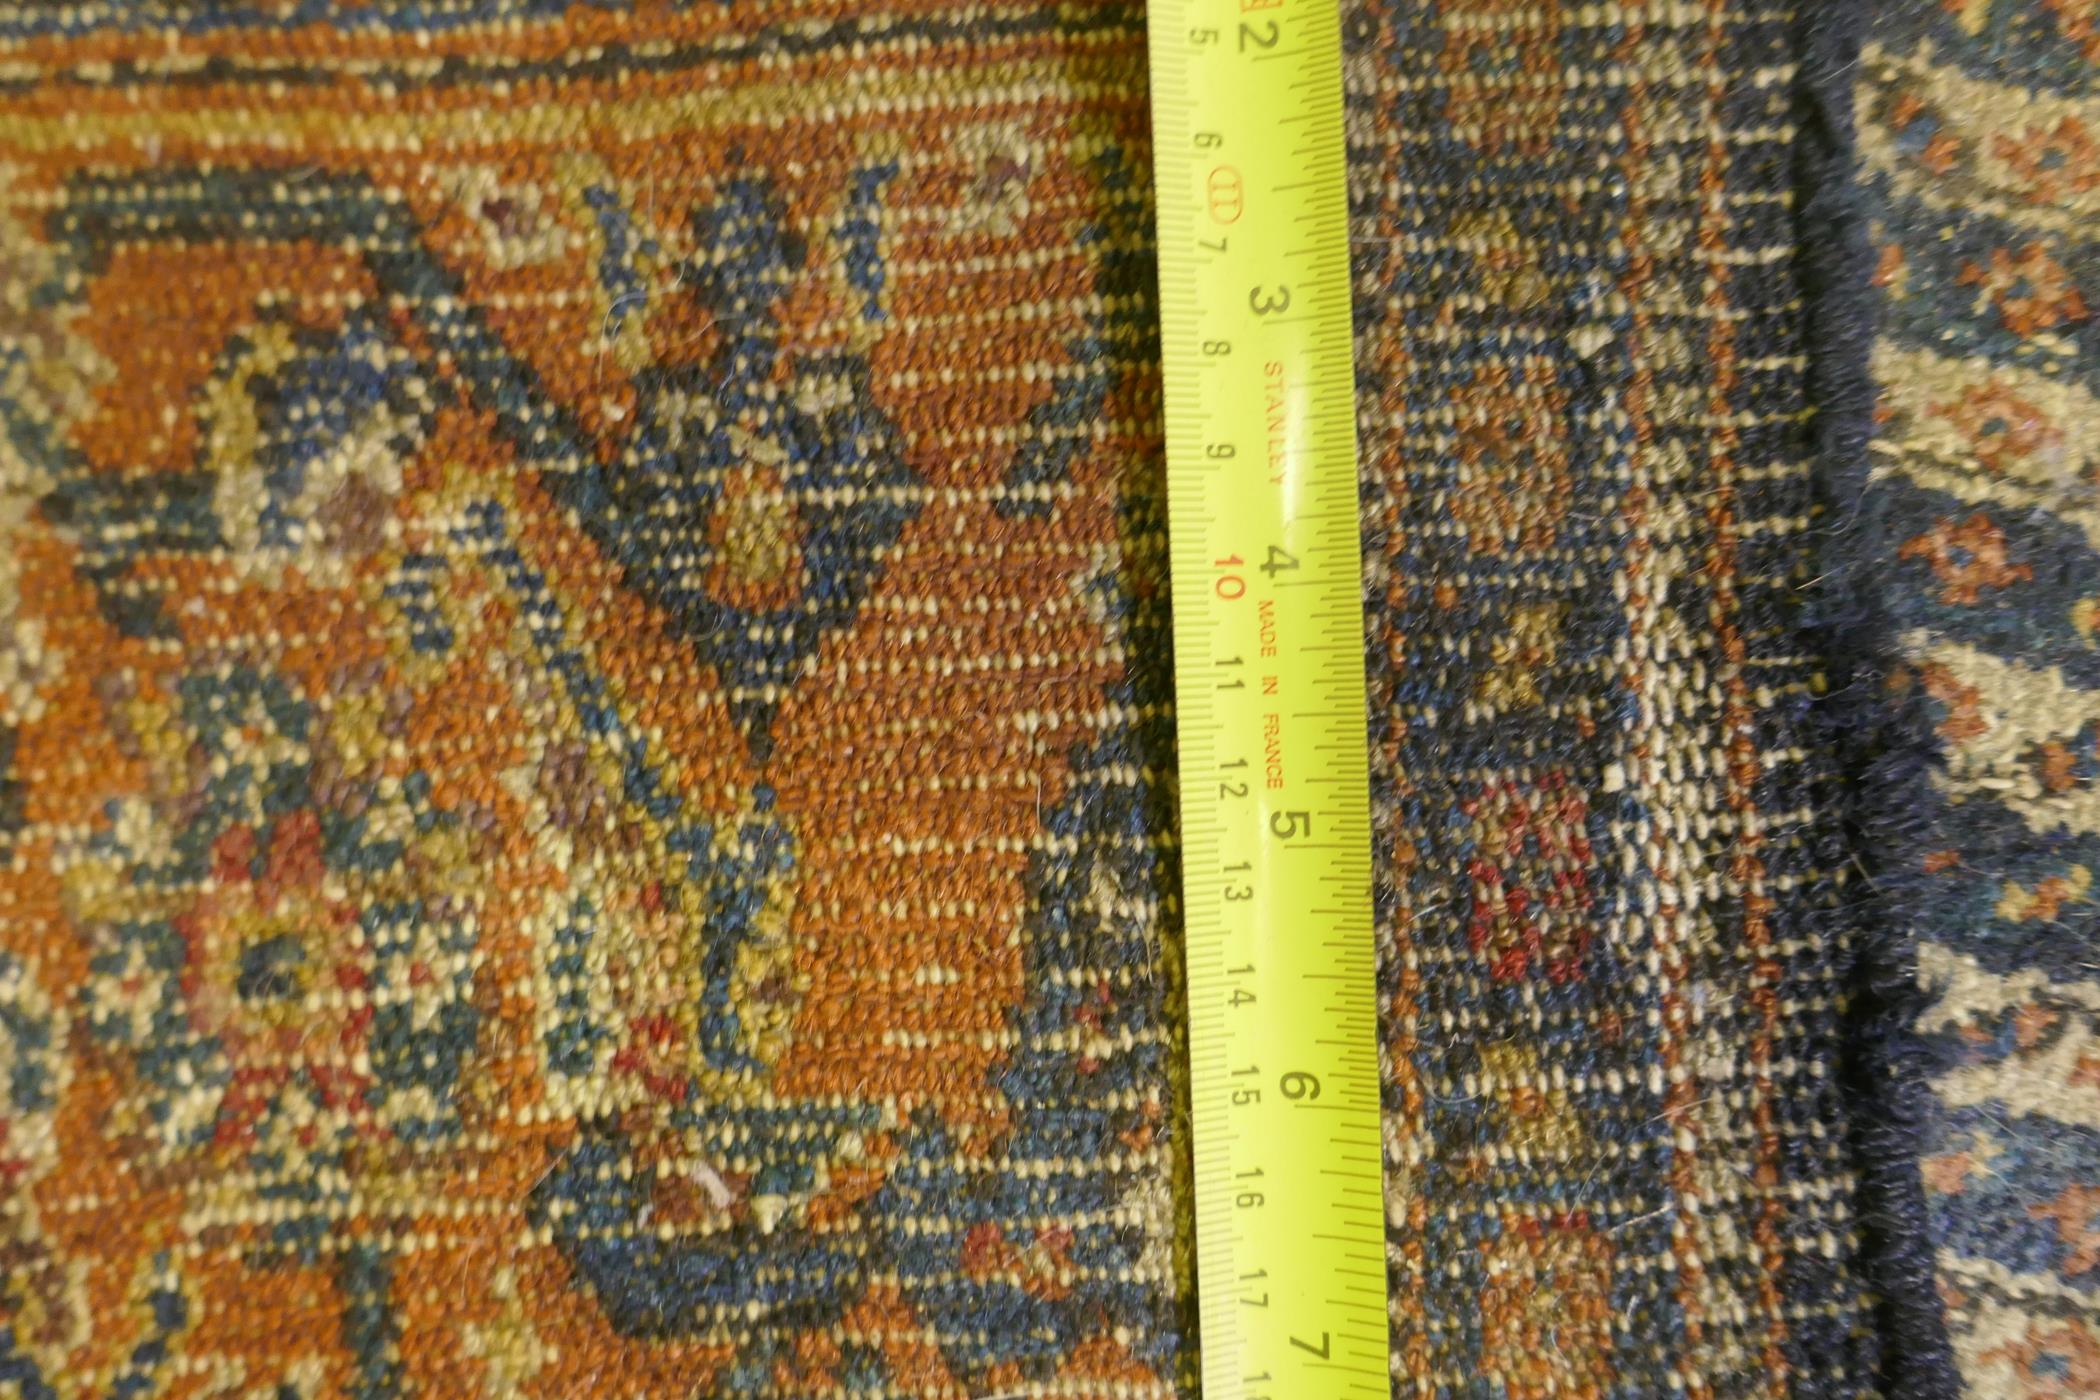 An antique Persian wool carpet with striped design and red borders, worn, 130 x 190 - Image 3 of 3